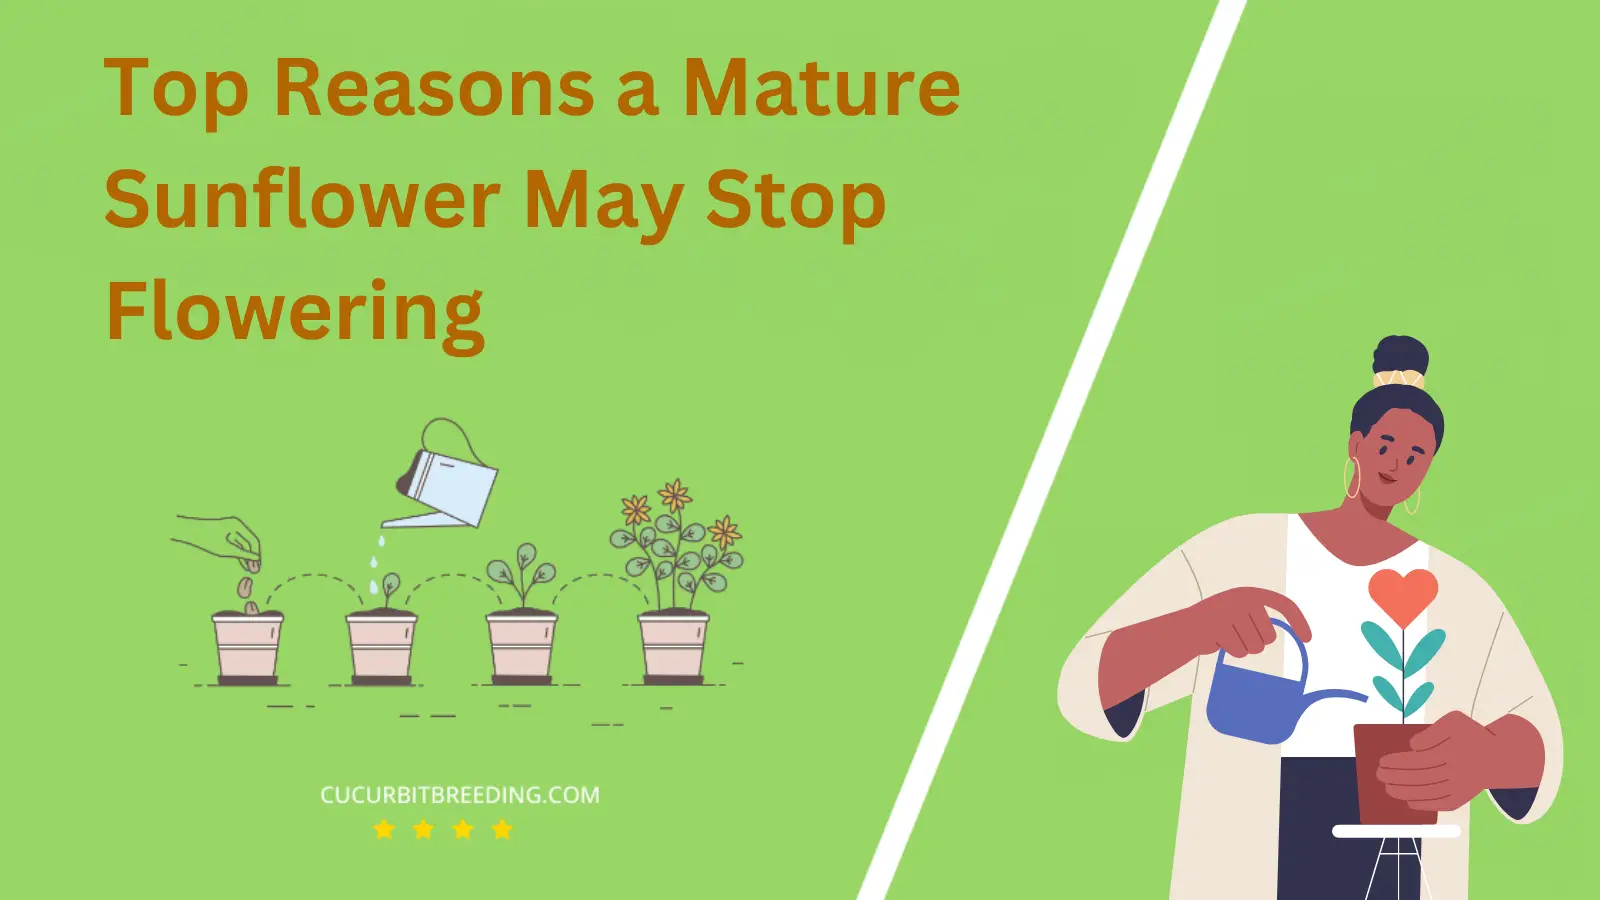 Top Reasons a Mature Sunflower May Stop Flowering